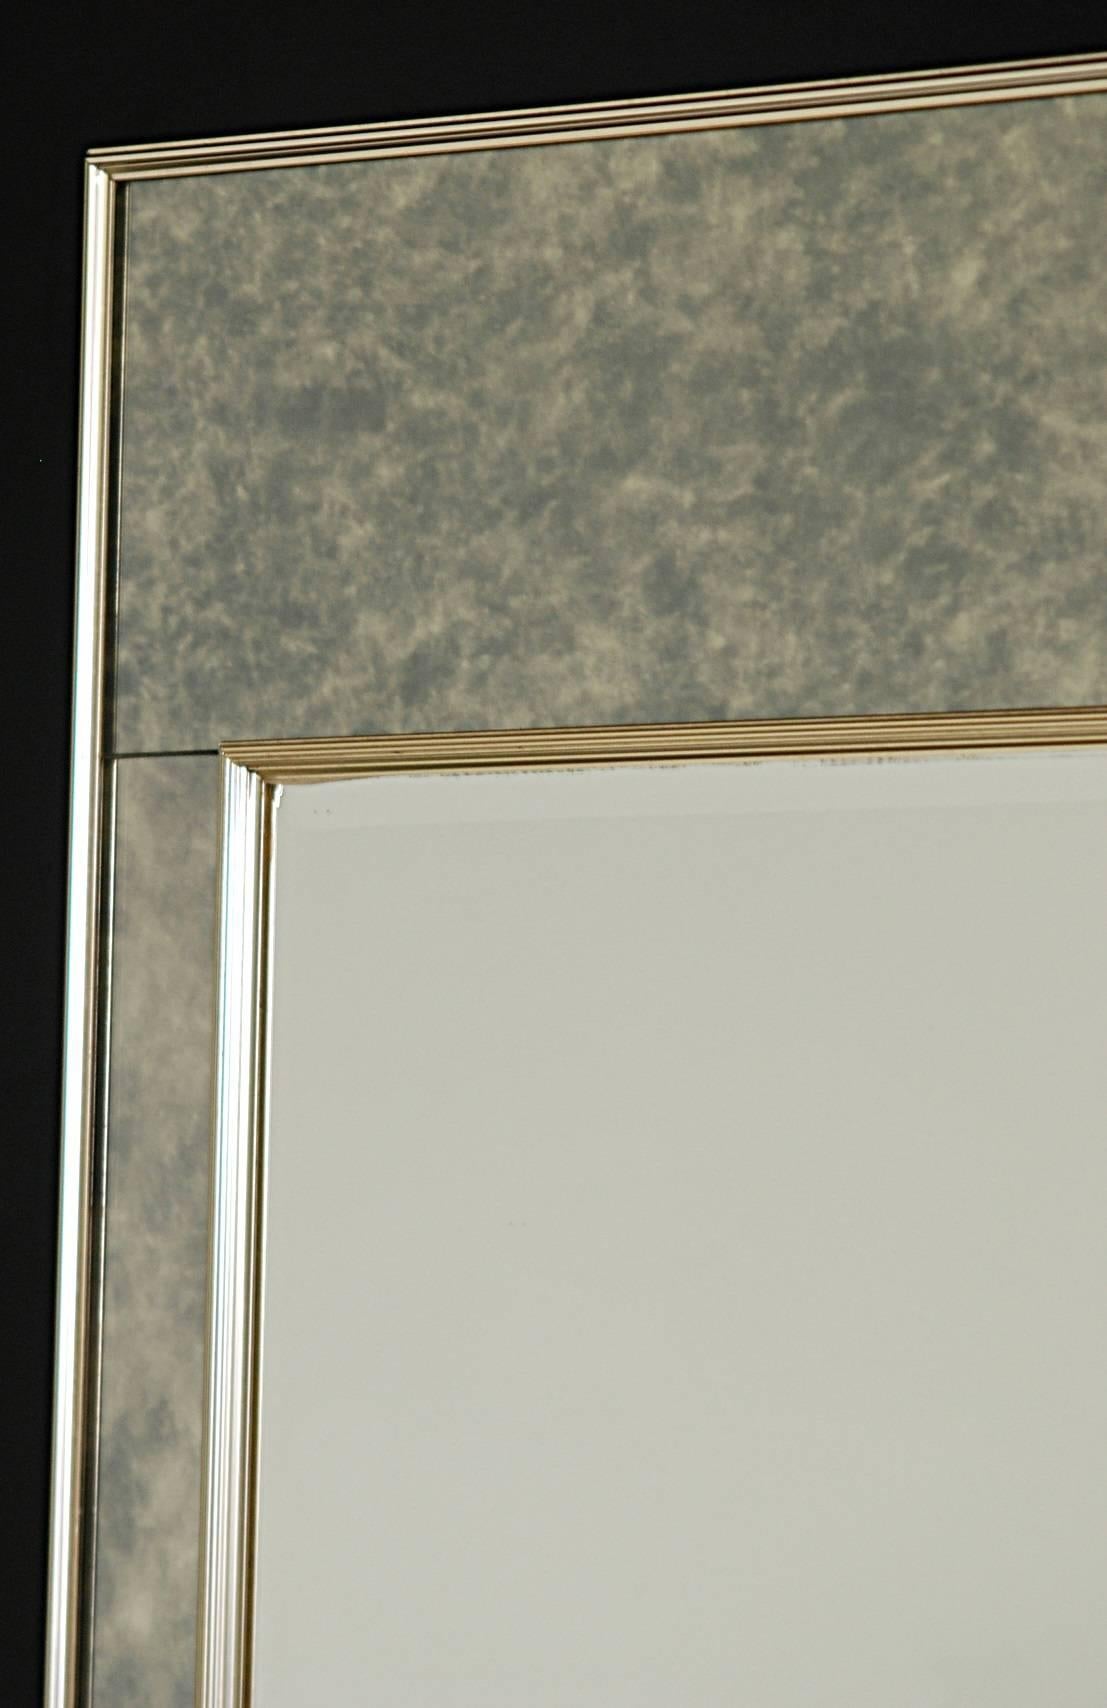 Antiqued mirror trim surrounding a beveled clear mirror insert in a brass frame.